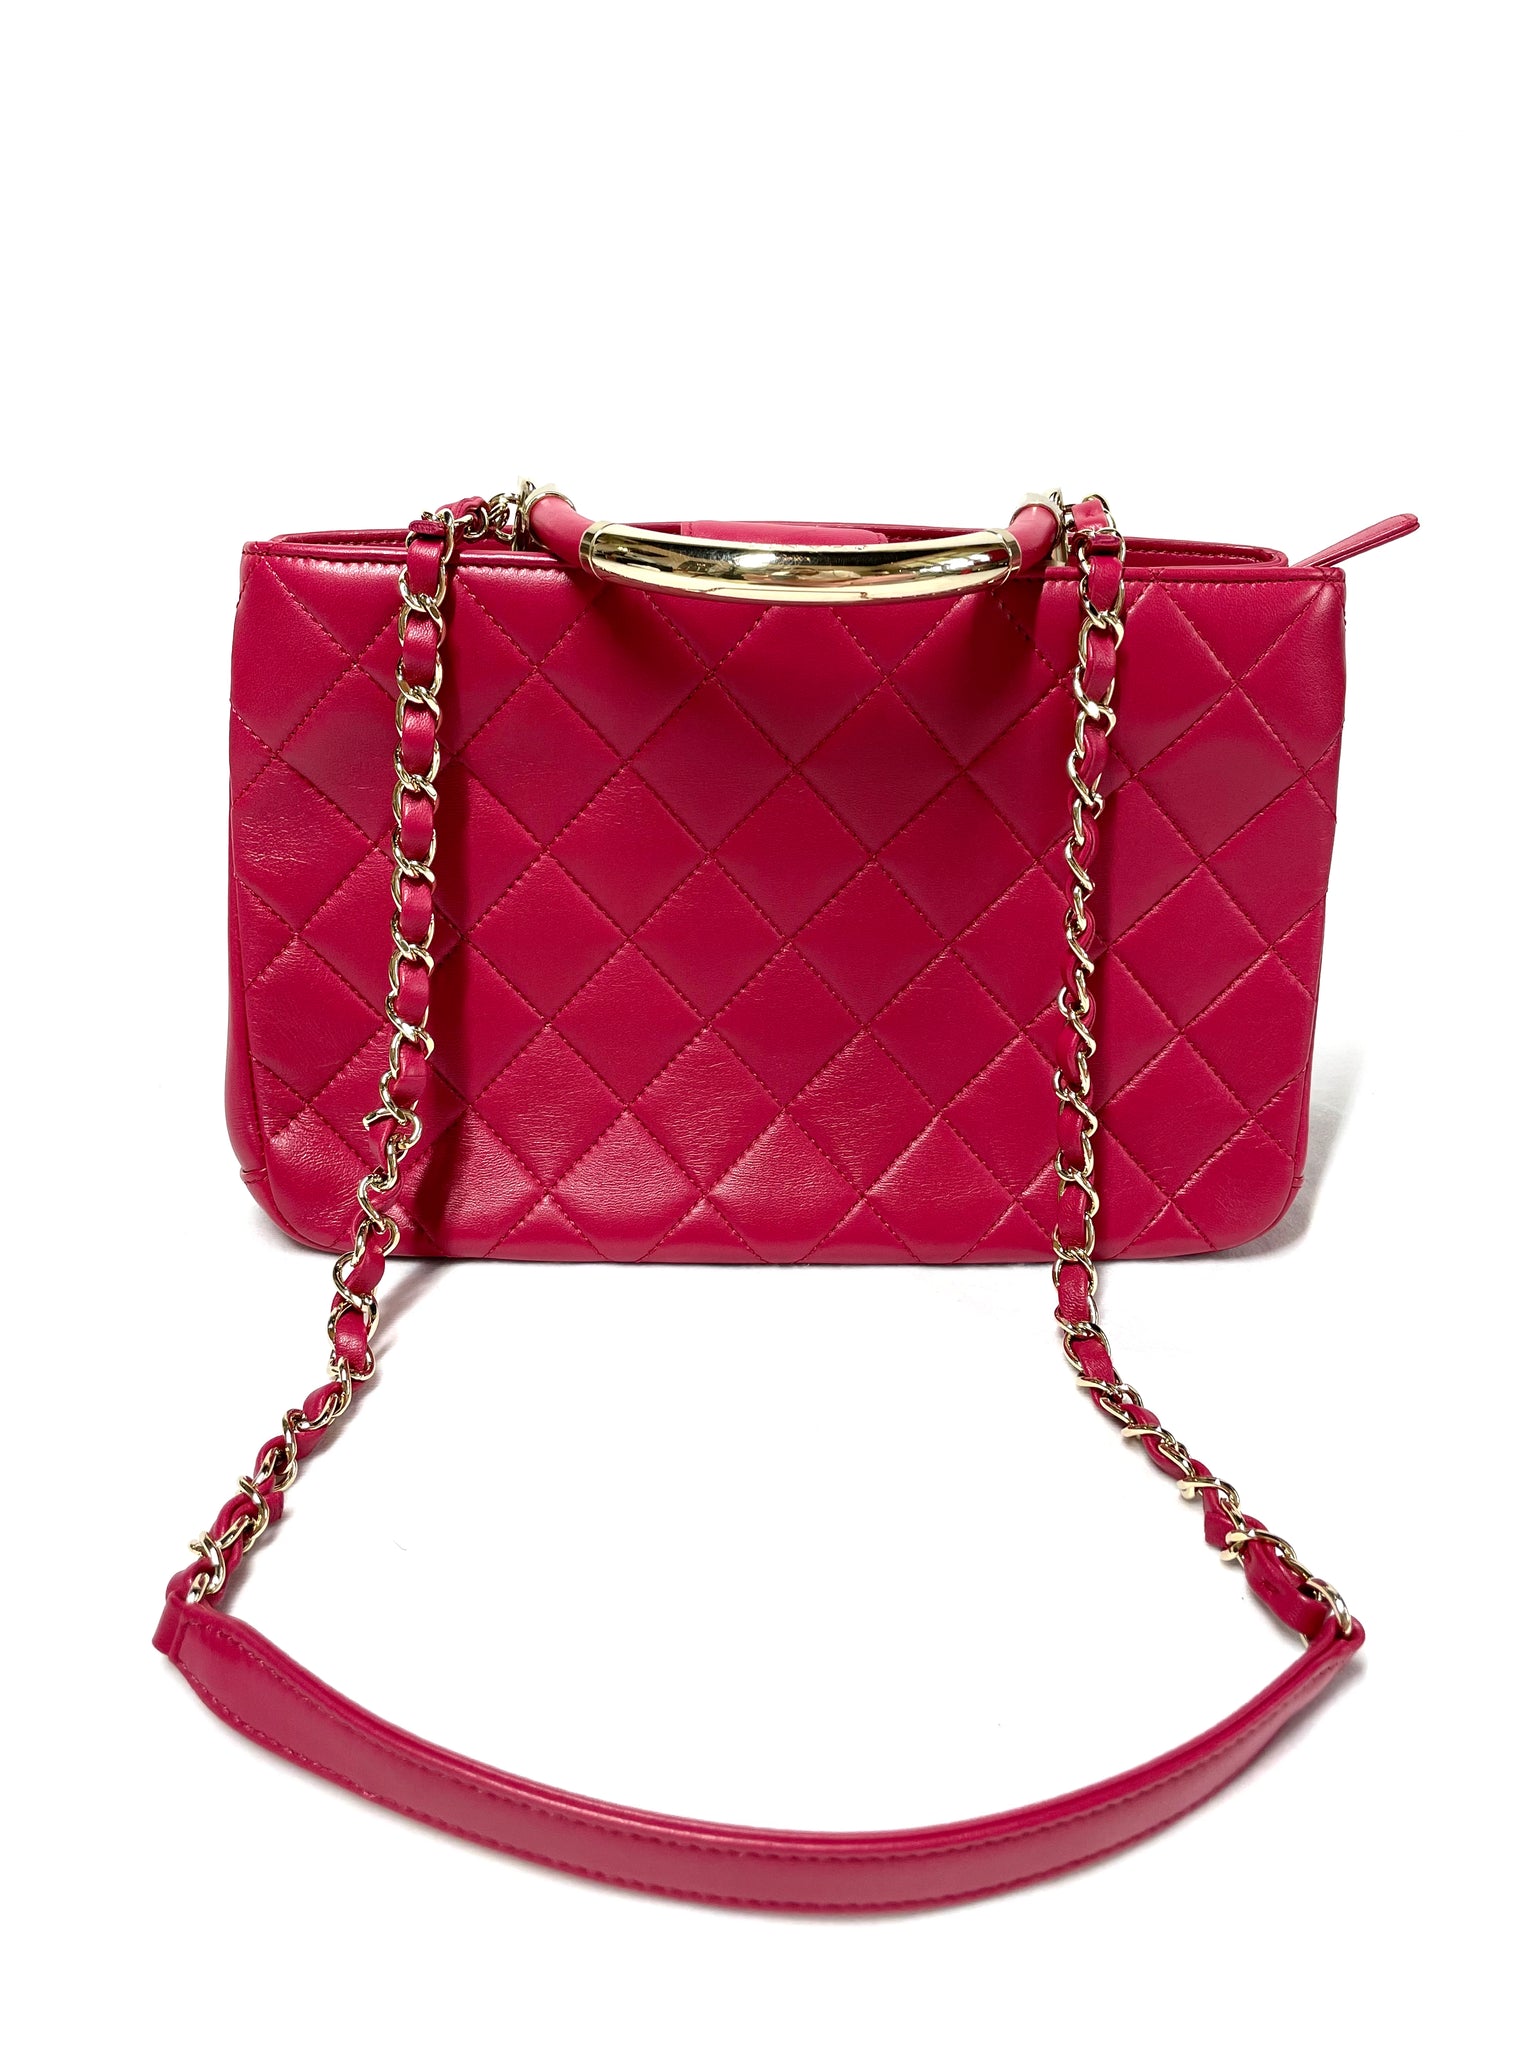 chanel country chic flap bag